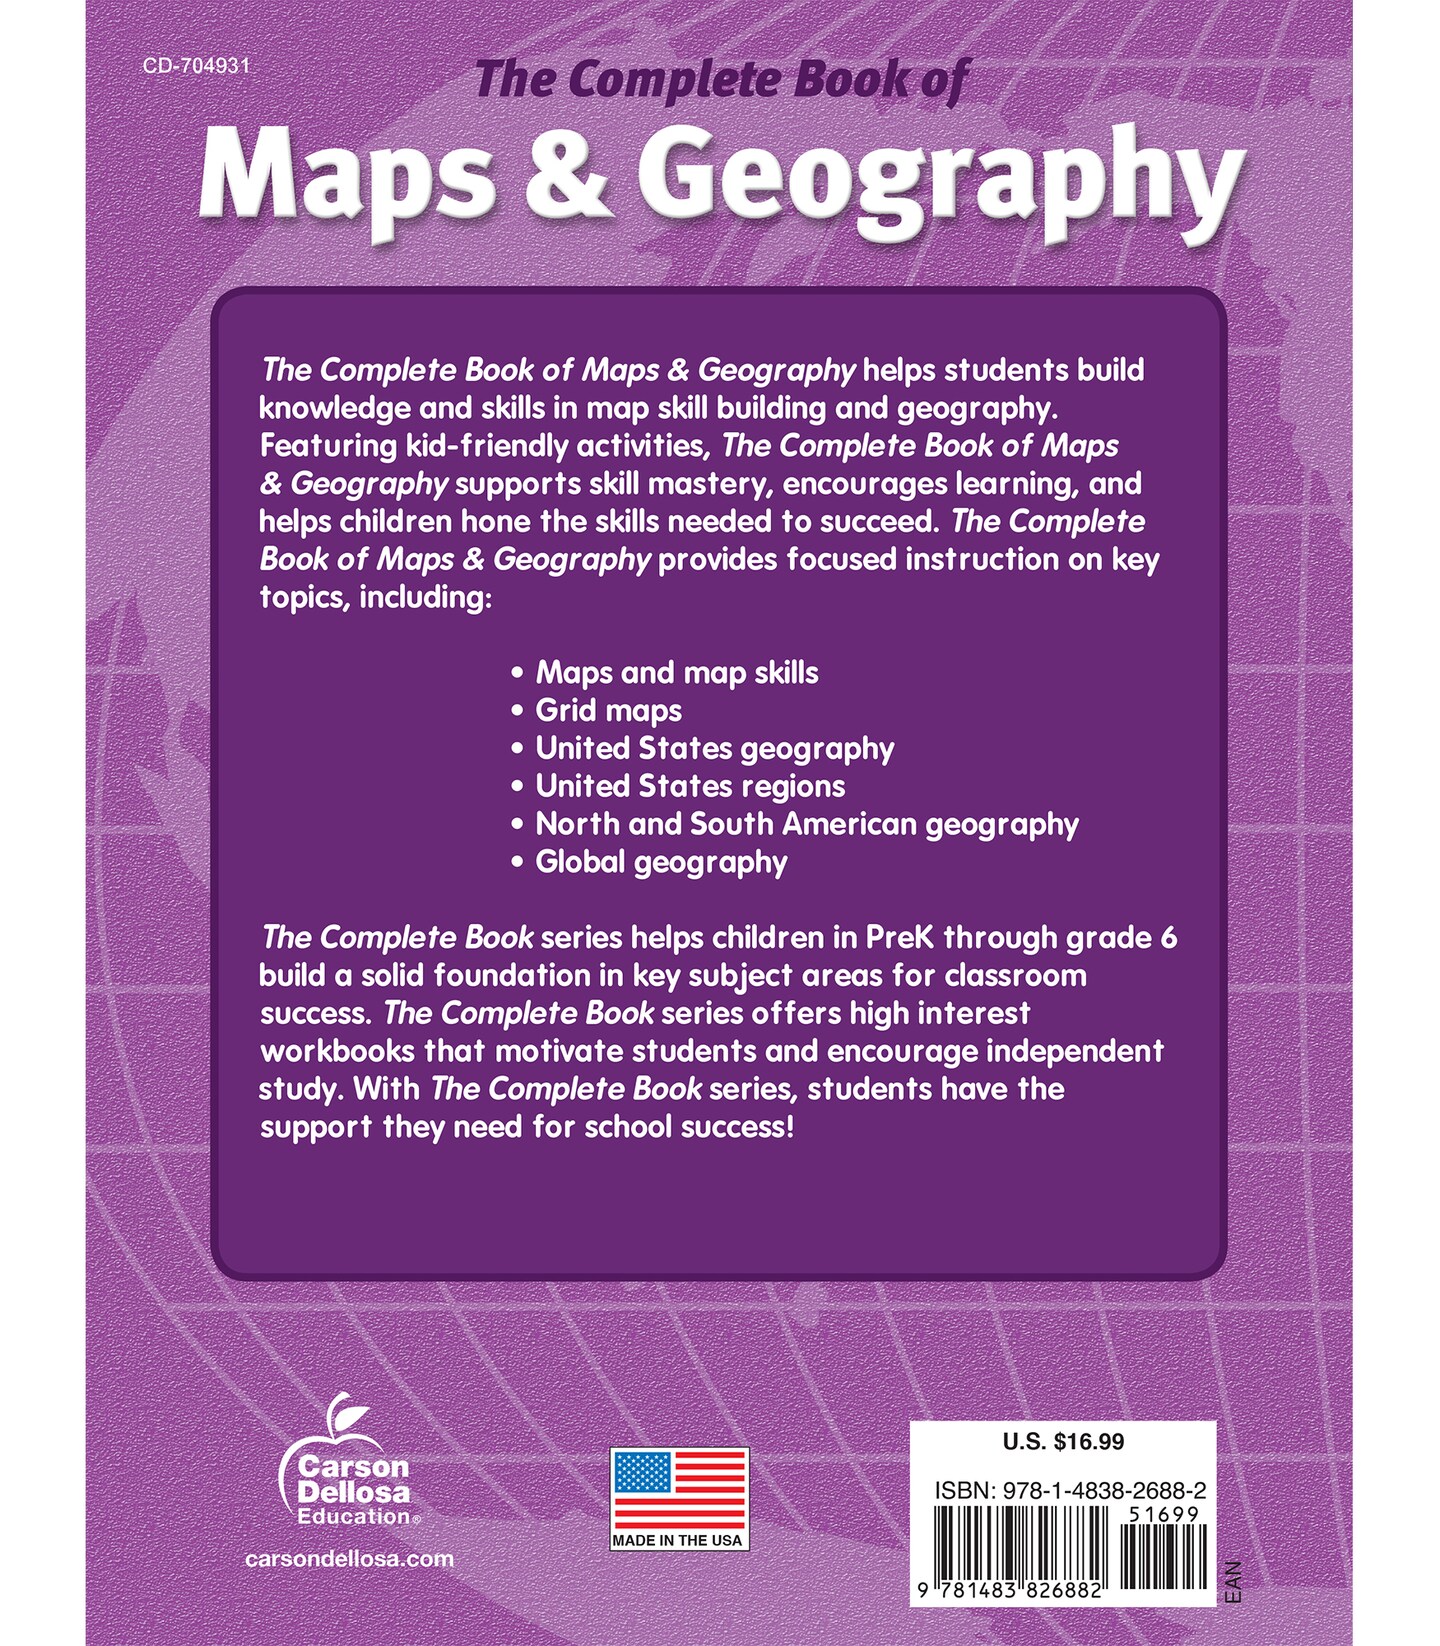 Complete Book of Maps and Geography Workbook, Global Geography for Kids Grades 3-6, United States Geography and Regions, Map Skills, Time Zones, Oceans